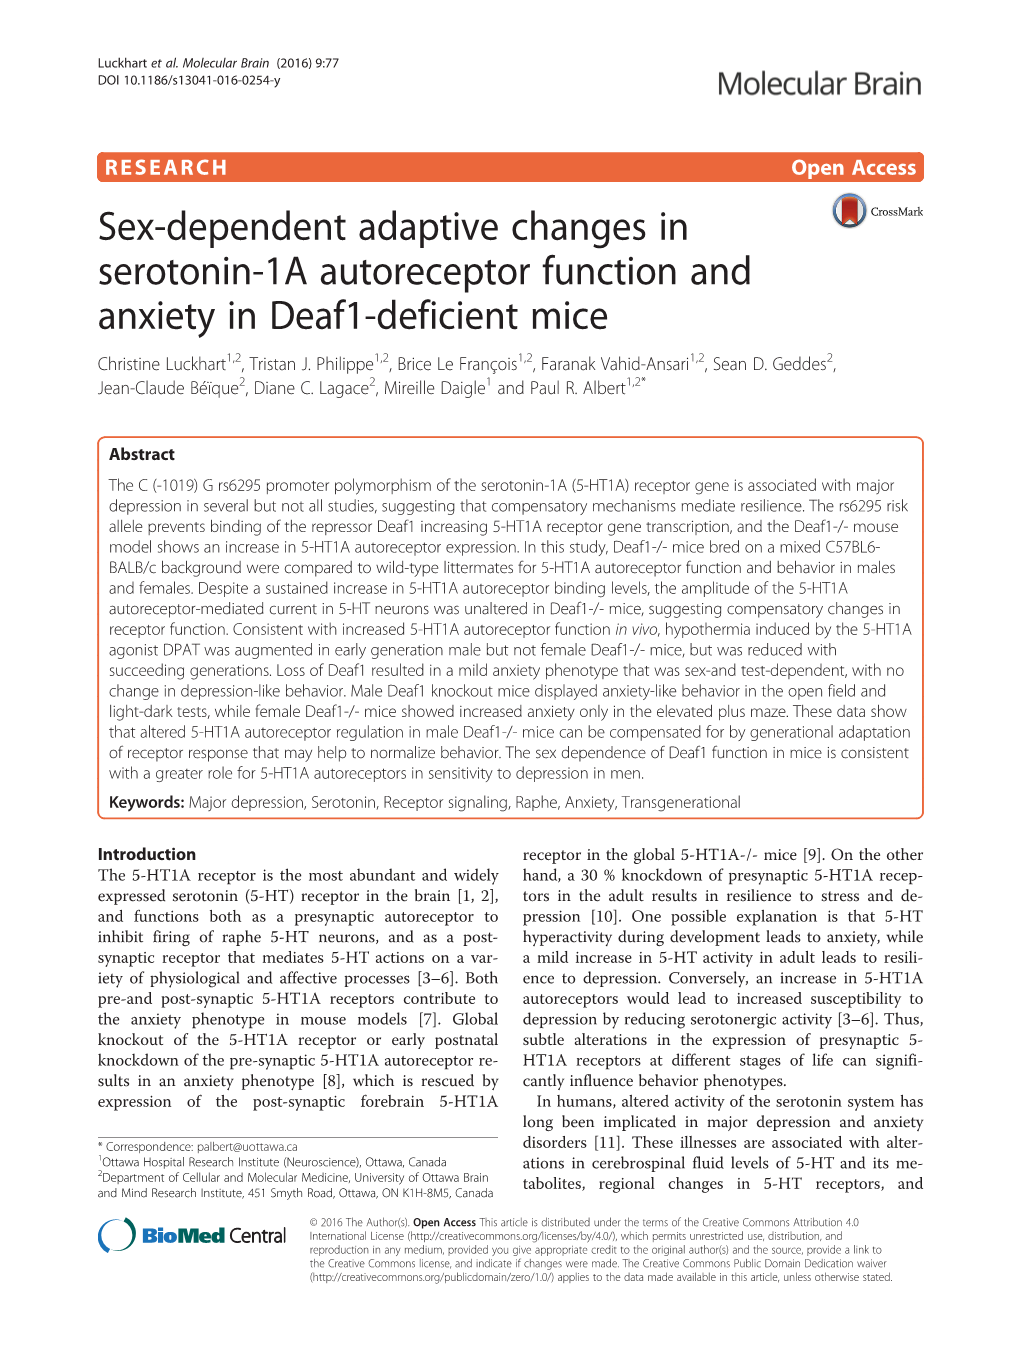 Sex-Dependent Adaptive Changes in Serotonin-1A Autoreceptor Function and Anxiety in Deaf1-Deficient Mice Christine Luckhart1,2, Tristan J